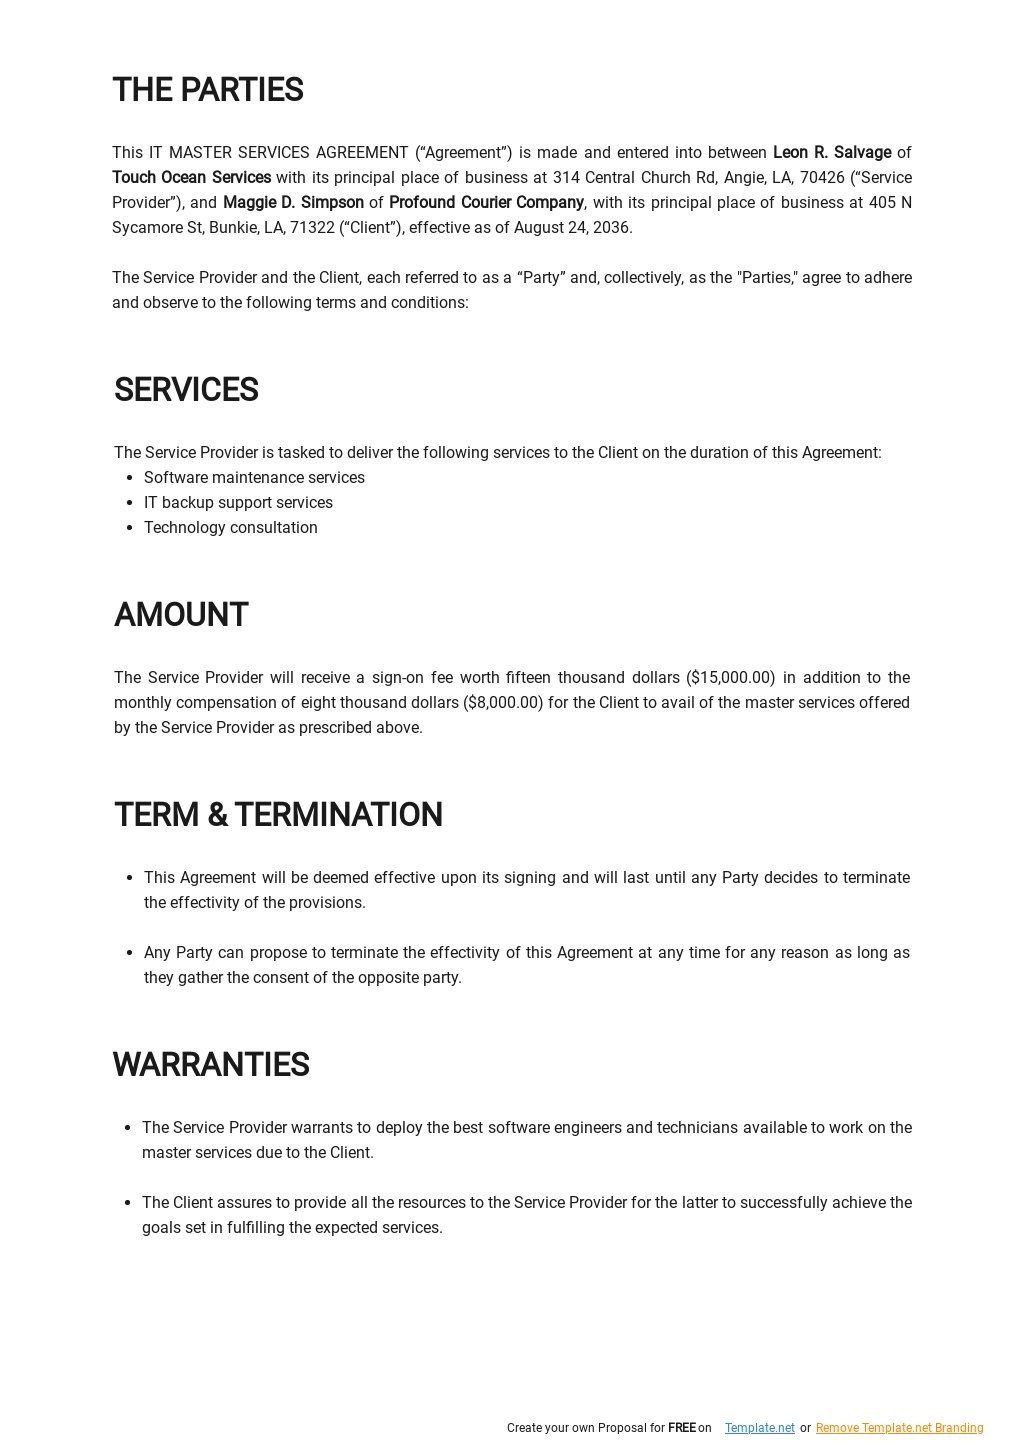 IT Master Services Agreement Template 1.jpe